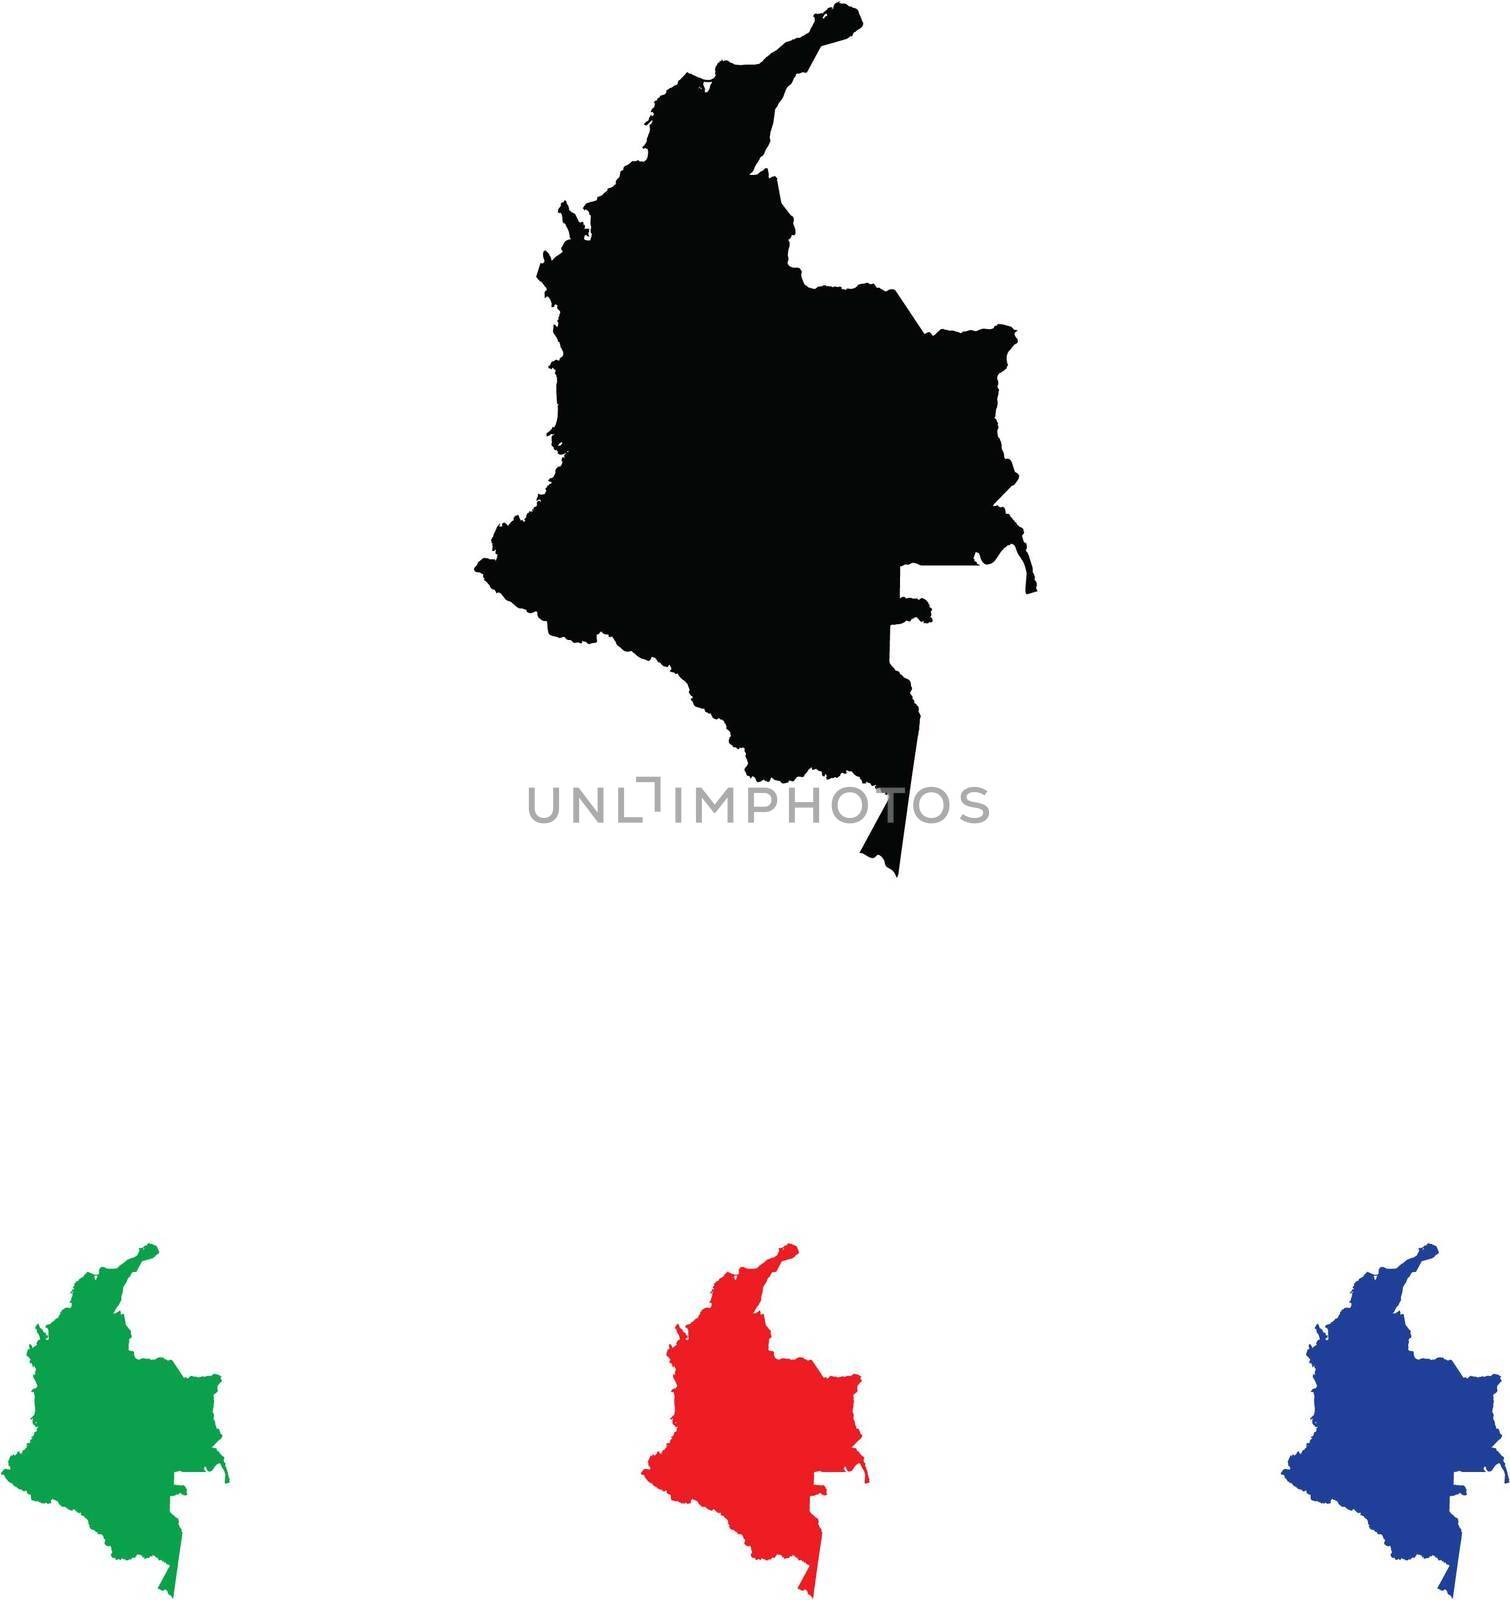 Colombia Icon Illustration with Four Color Variations